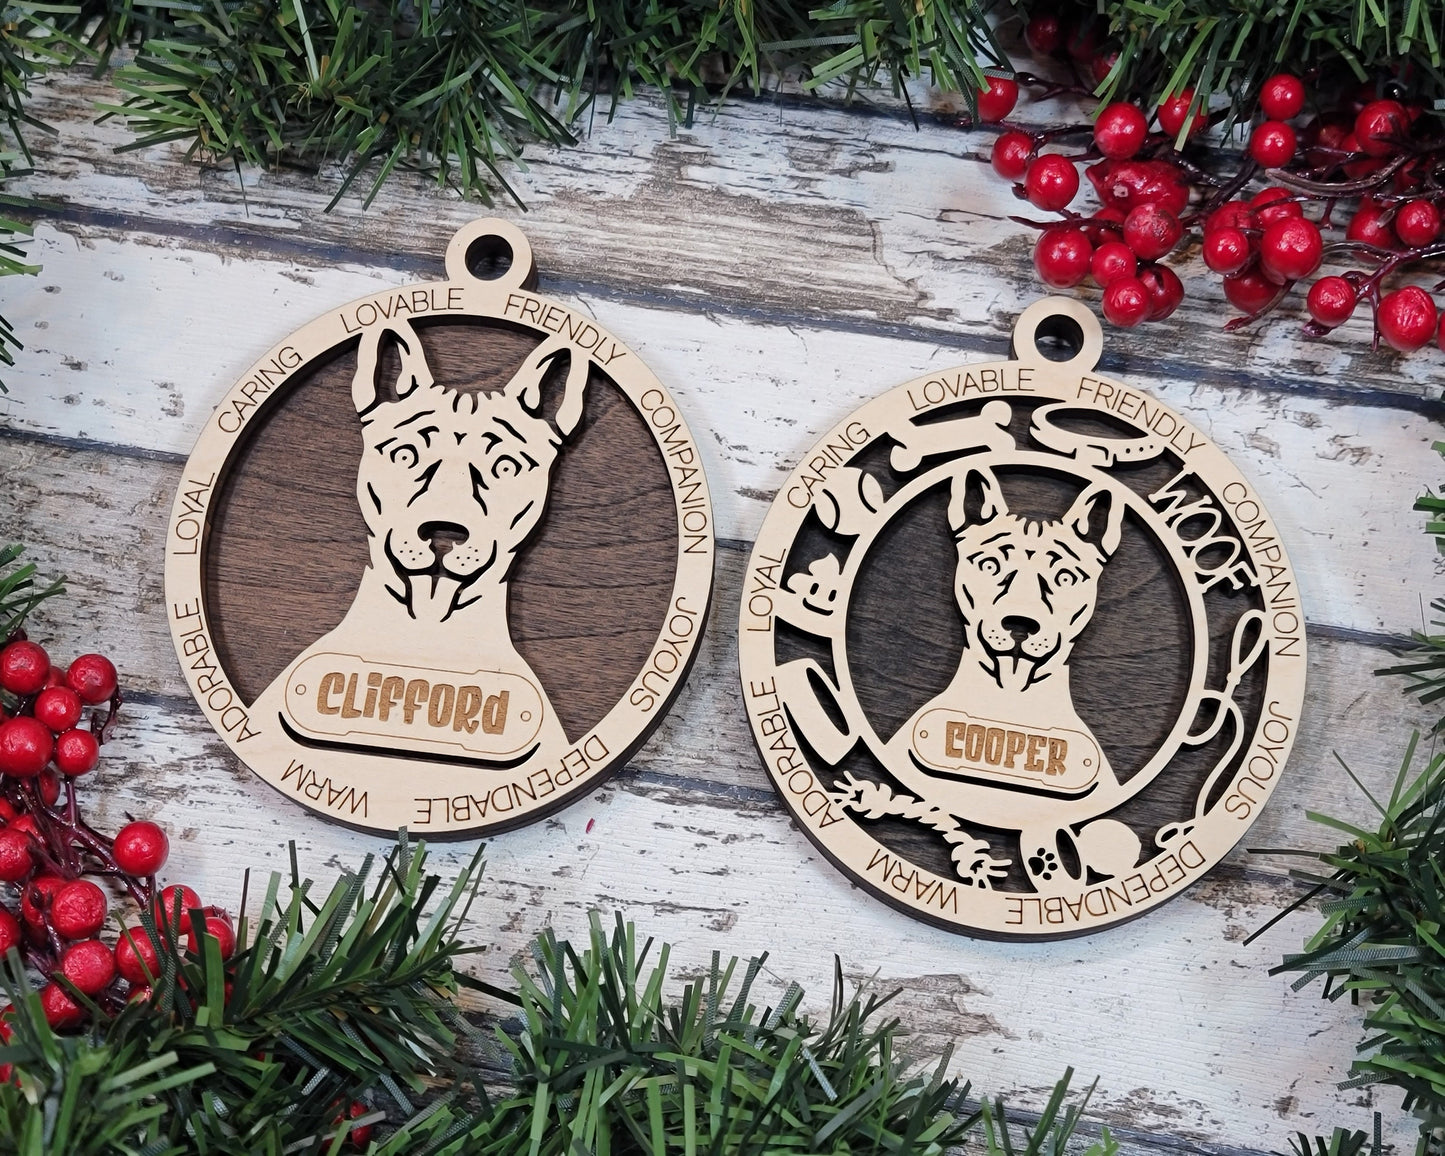 Basenji - Adorable Dog Ornaments - 2 Ornaments included - SVG, PDF, AI File Download - Sized for Glowforge